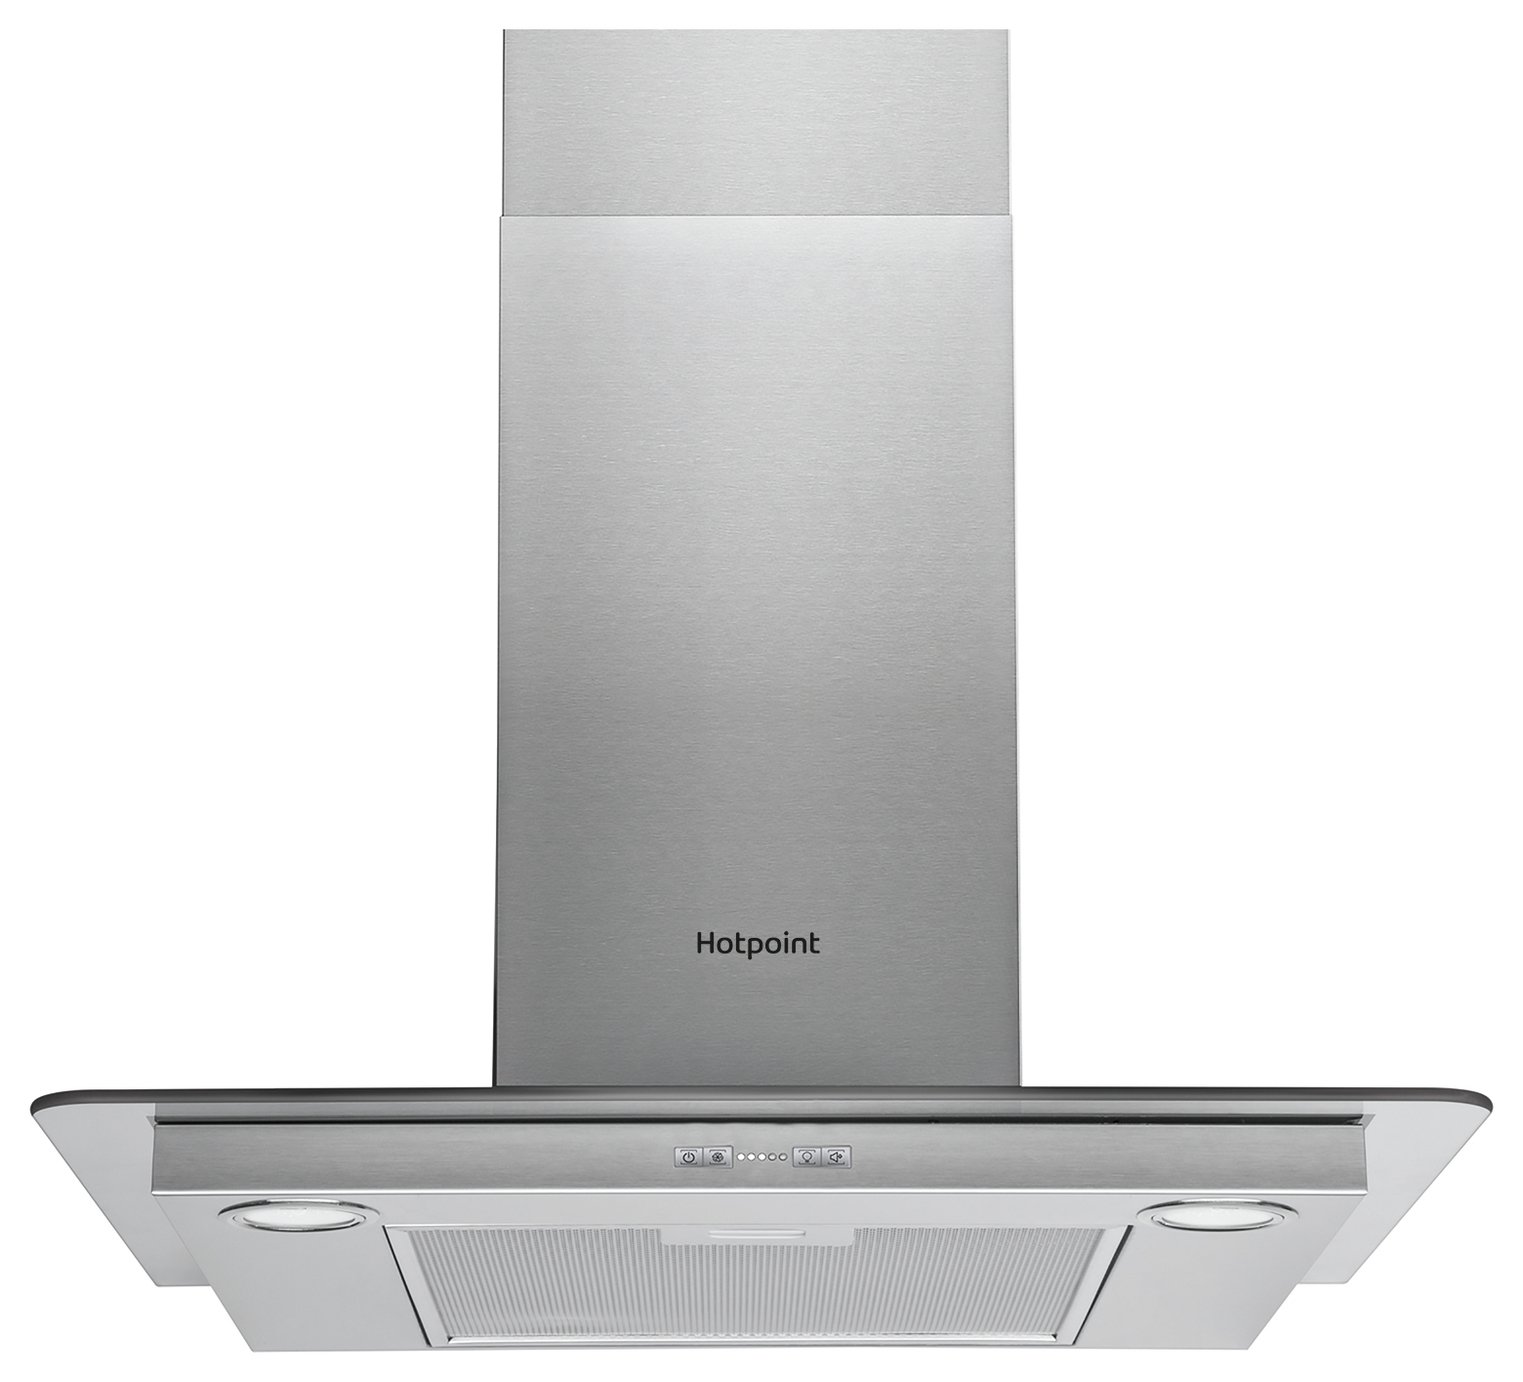 Hotpoint PHFG7.4FLMX 70cm Cooker Hood - Stainless Steel